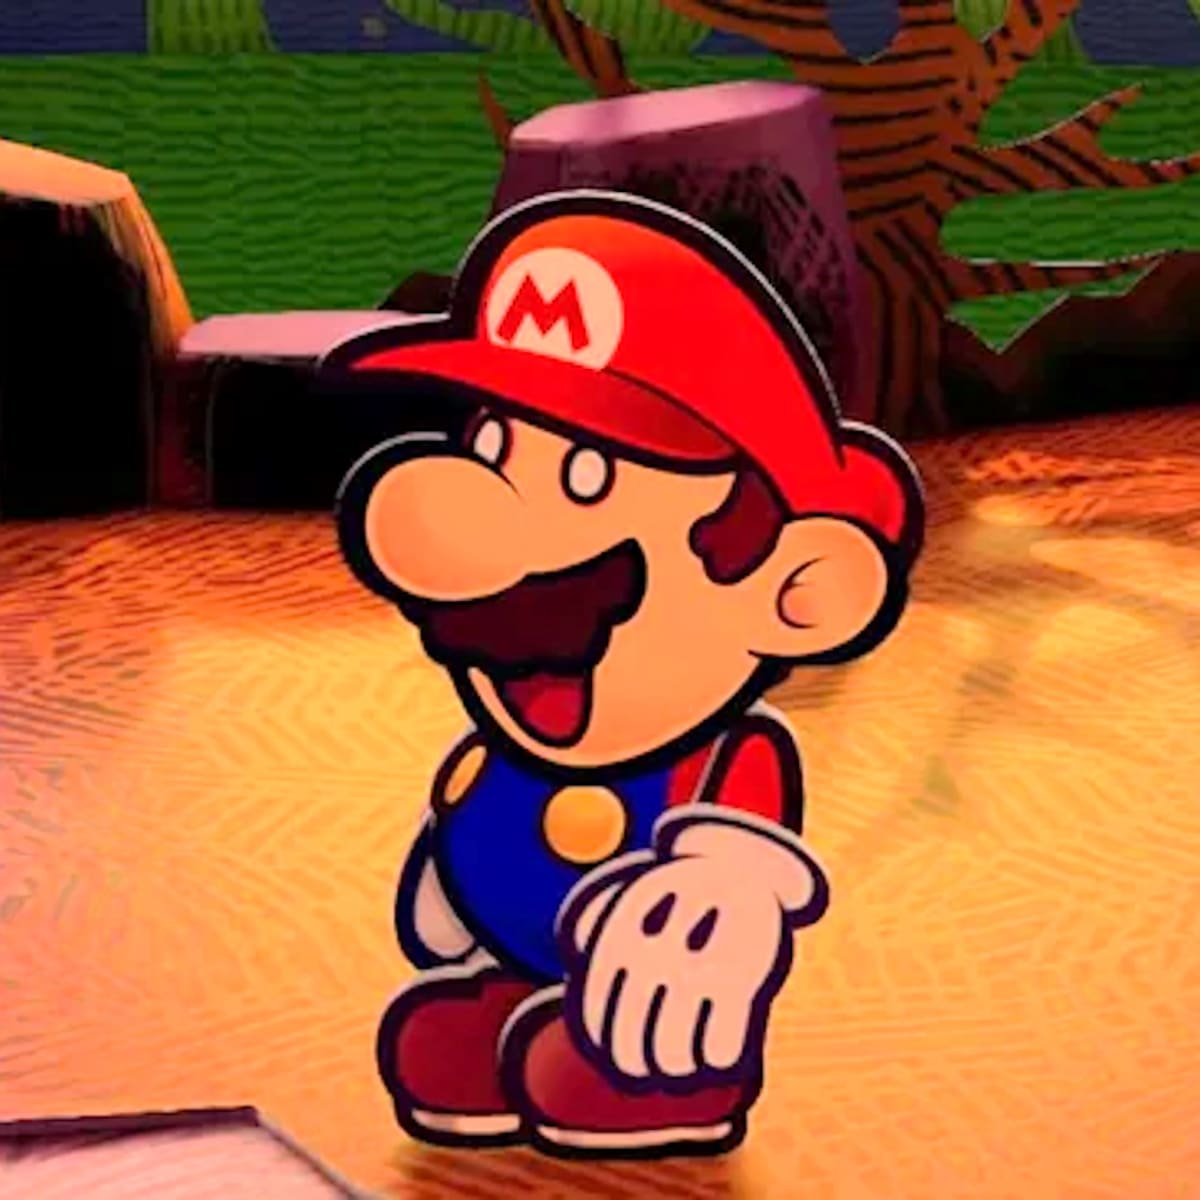 Paper Mario The Thousand-Year Door on Switch has an ESRB rating